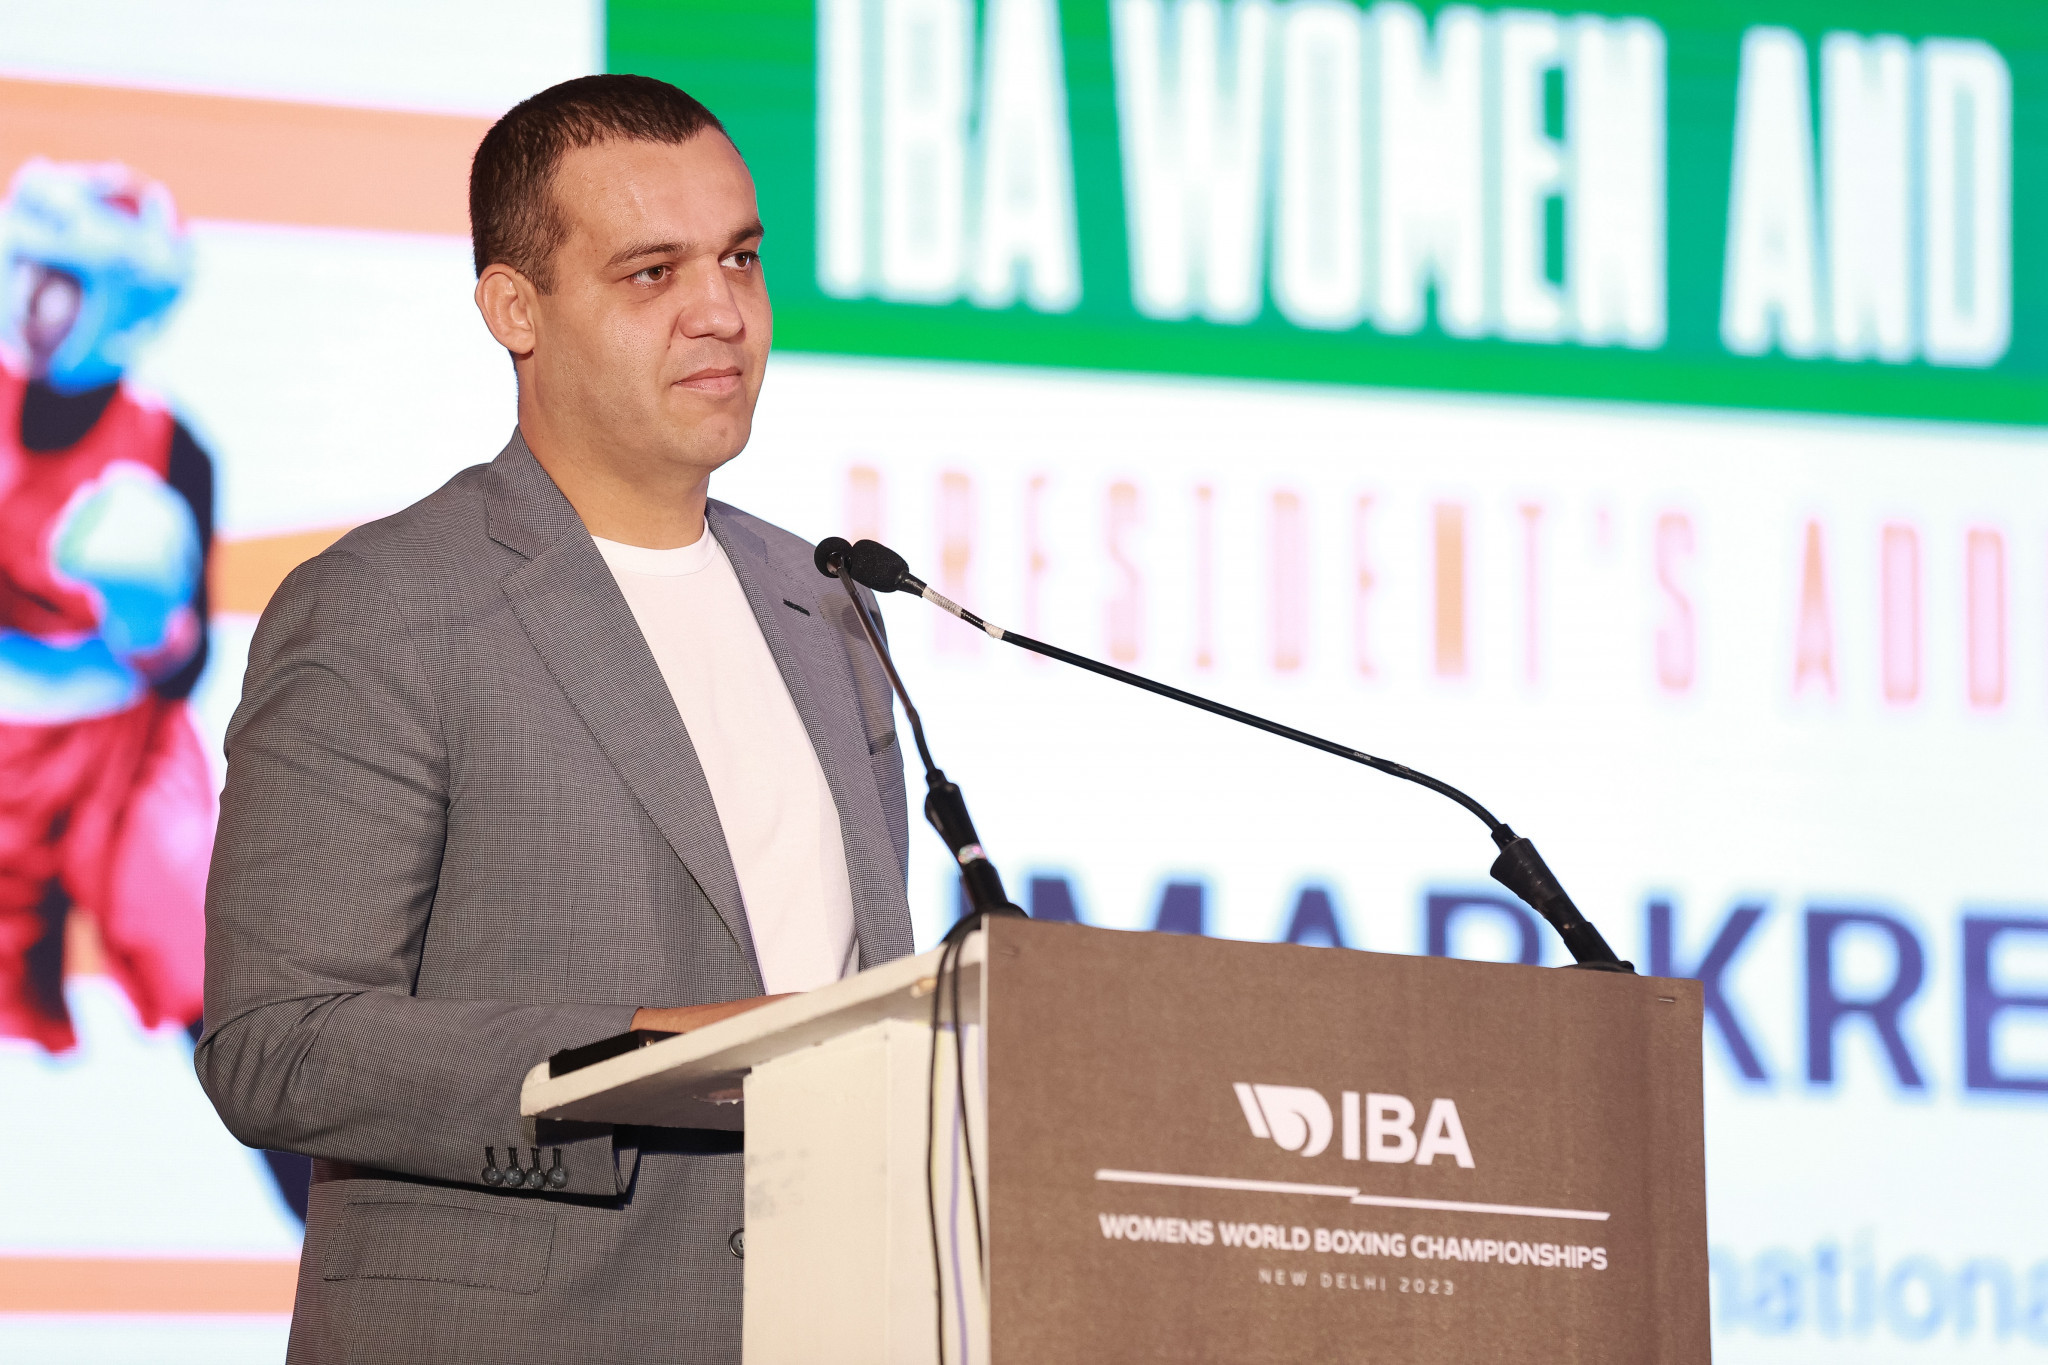 IBA President Umar Kremlev has claimed that the Common Cause Alliance's plans to create an alternative event to the Men's World Championships like 